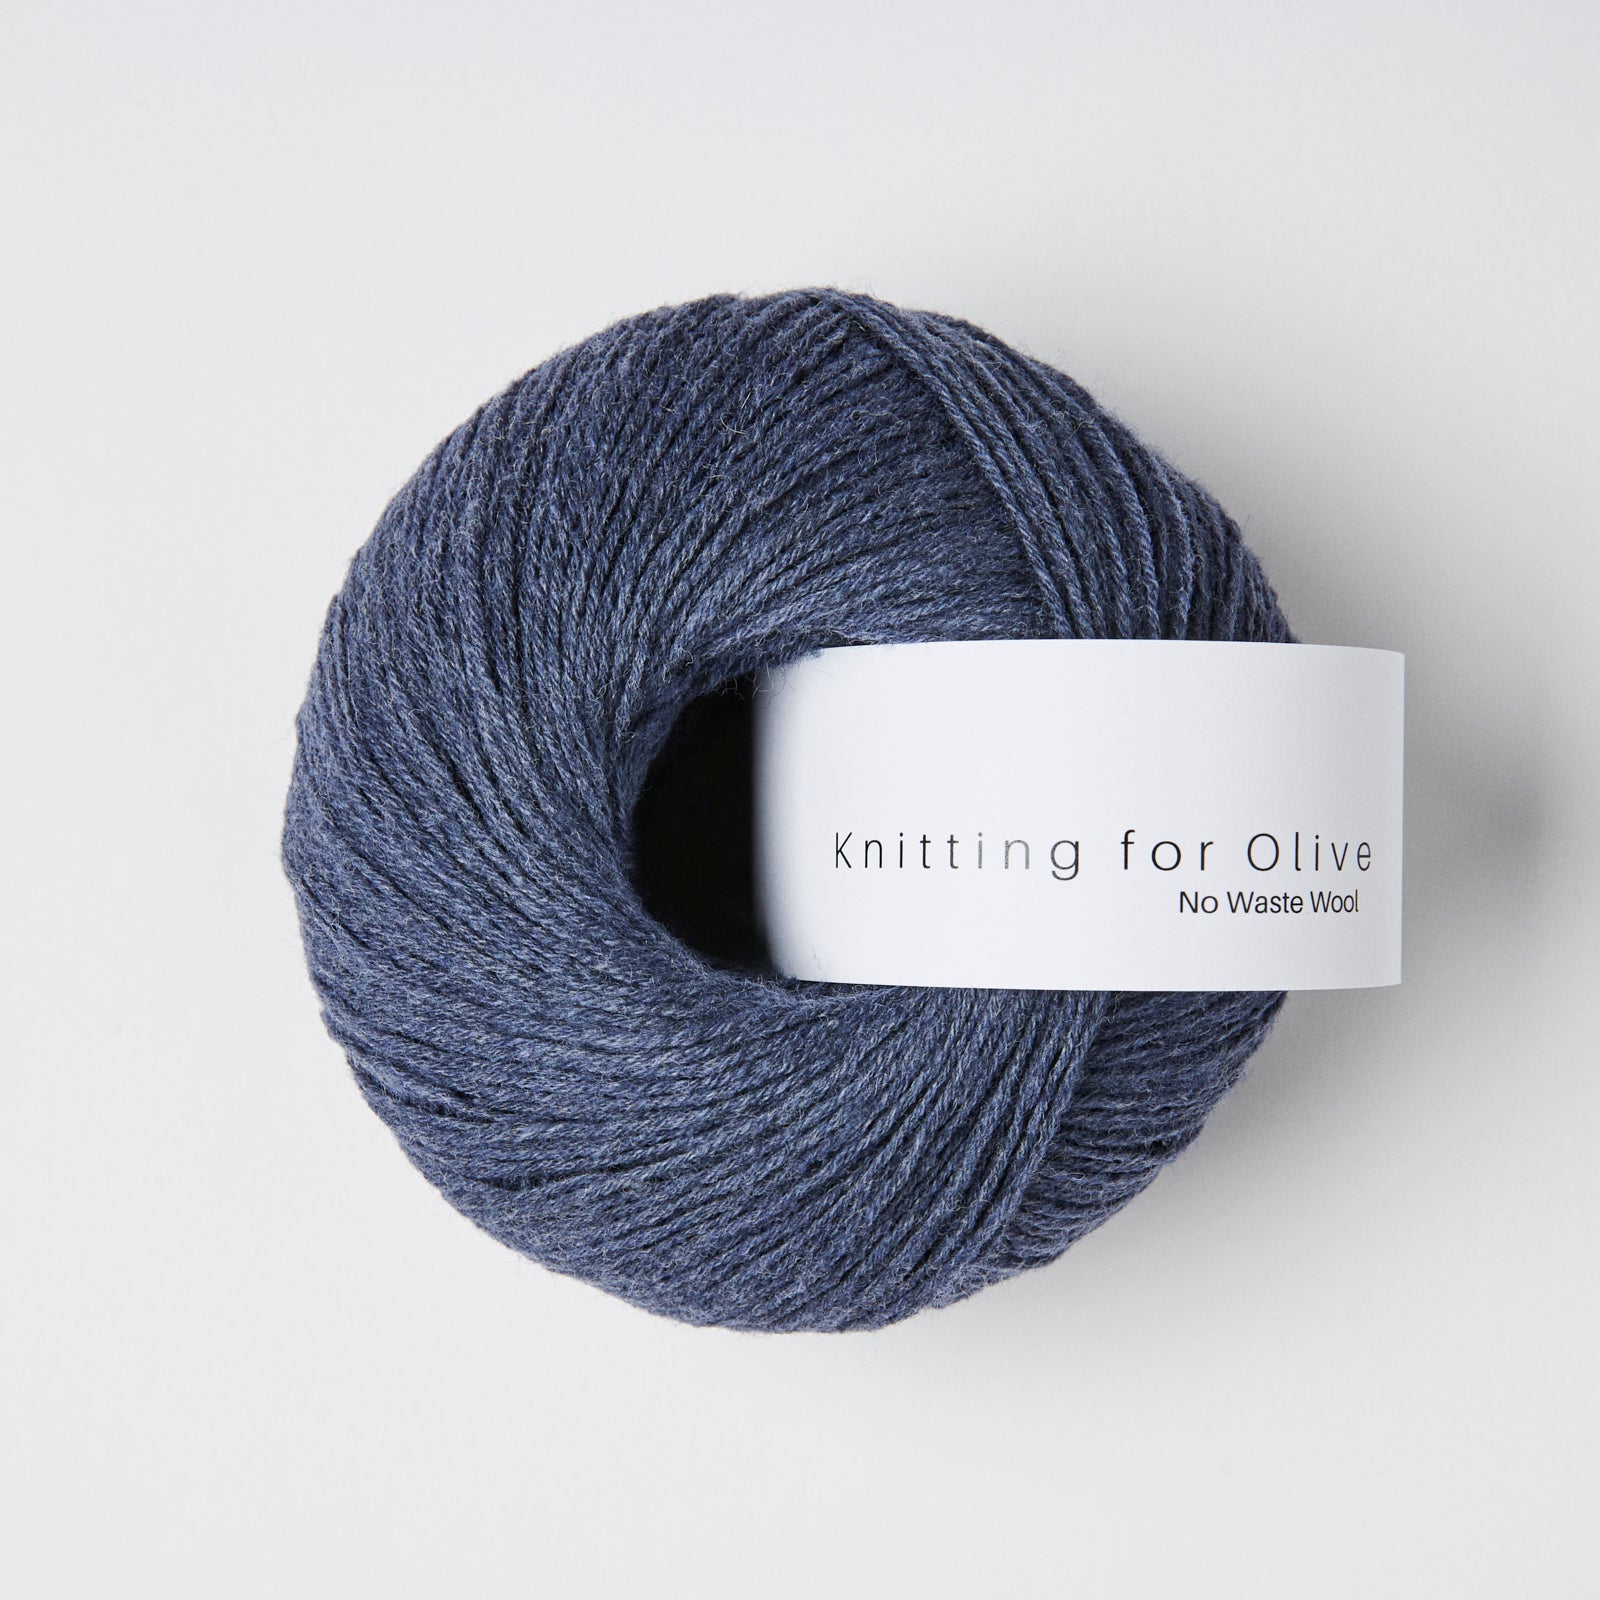 Knitting for Olive No Waste Wool - Blue Whale